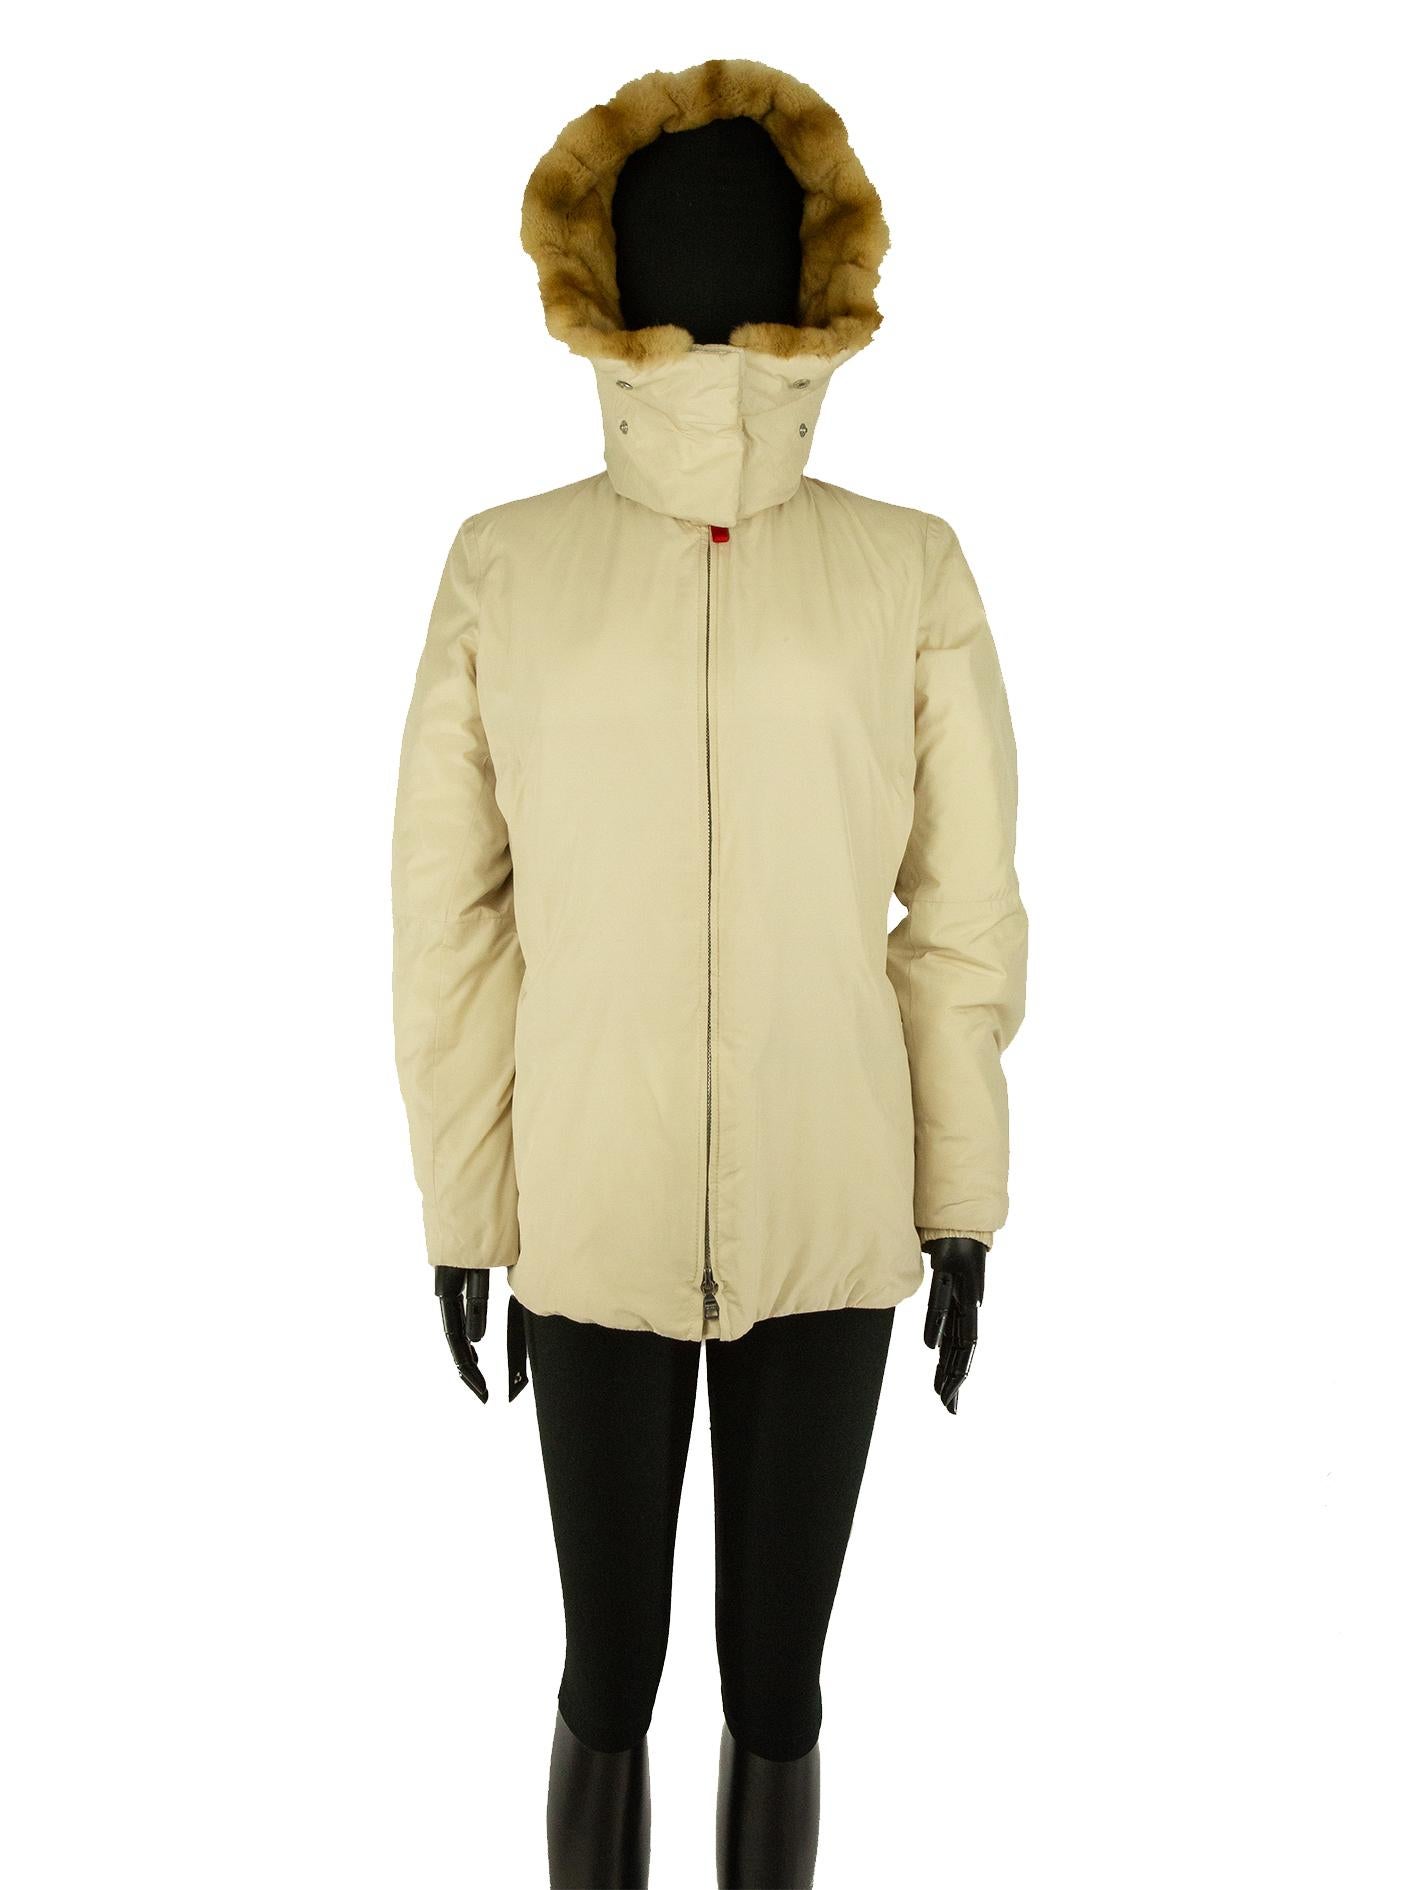 A Prada coat in ecru, filled with polyester down. The fur-trimmed hood, made of dyed kolinski fur, is attached to a wool collar and is fully detachable. Inside of the coat contains a zip on the back lining making the jacket making it foldable and